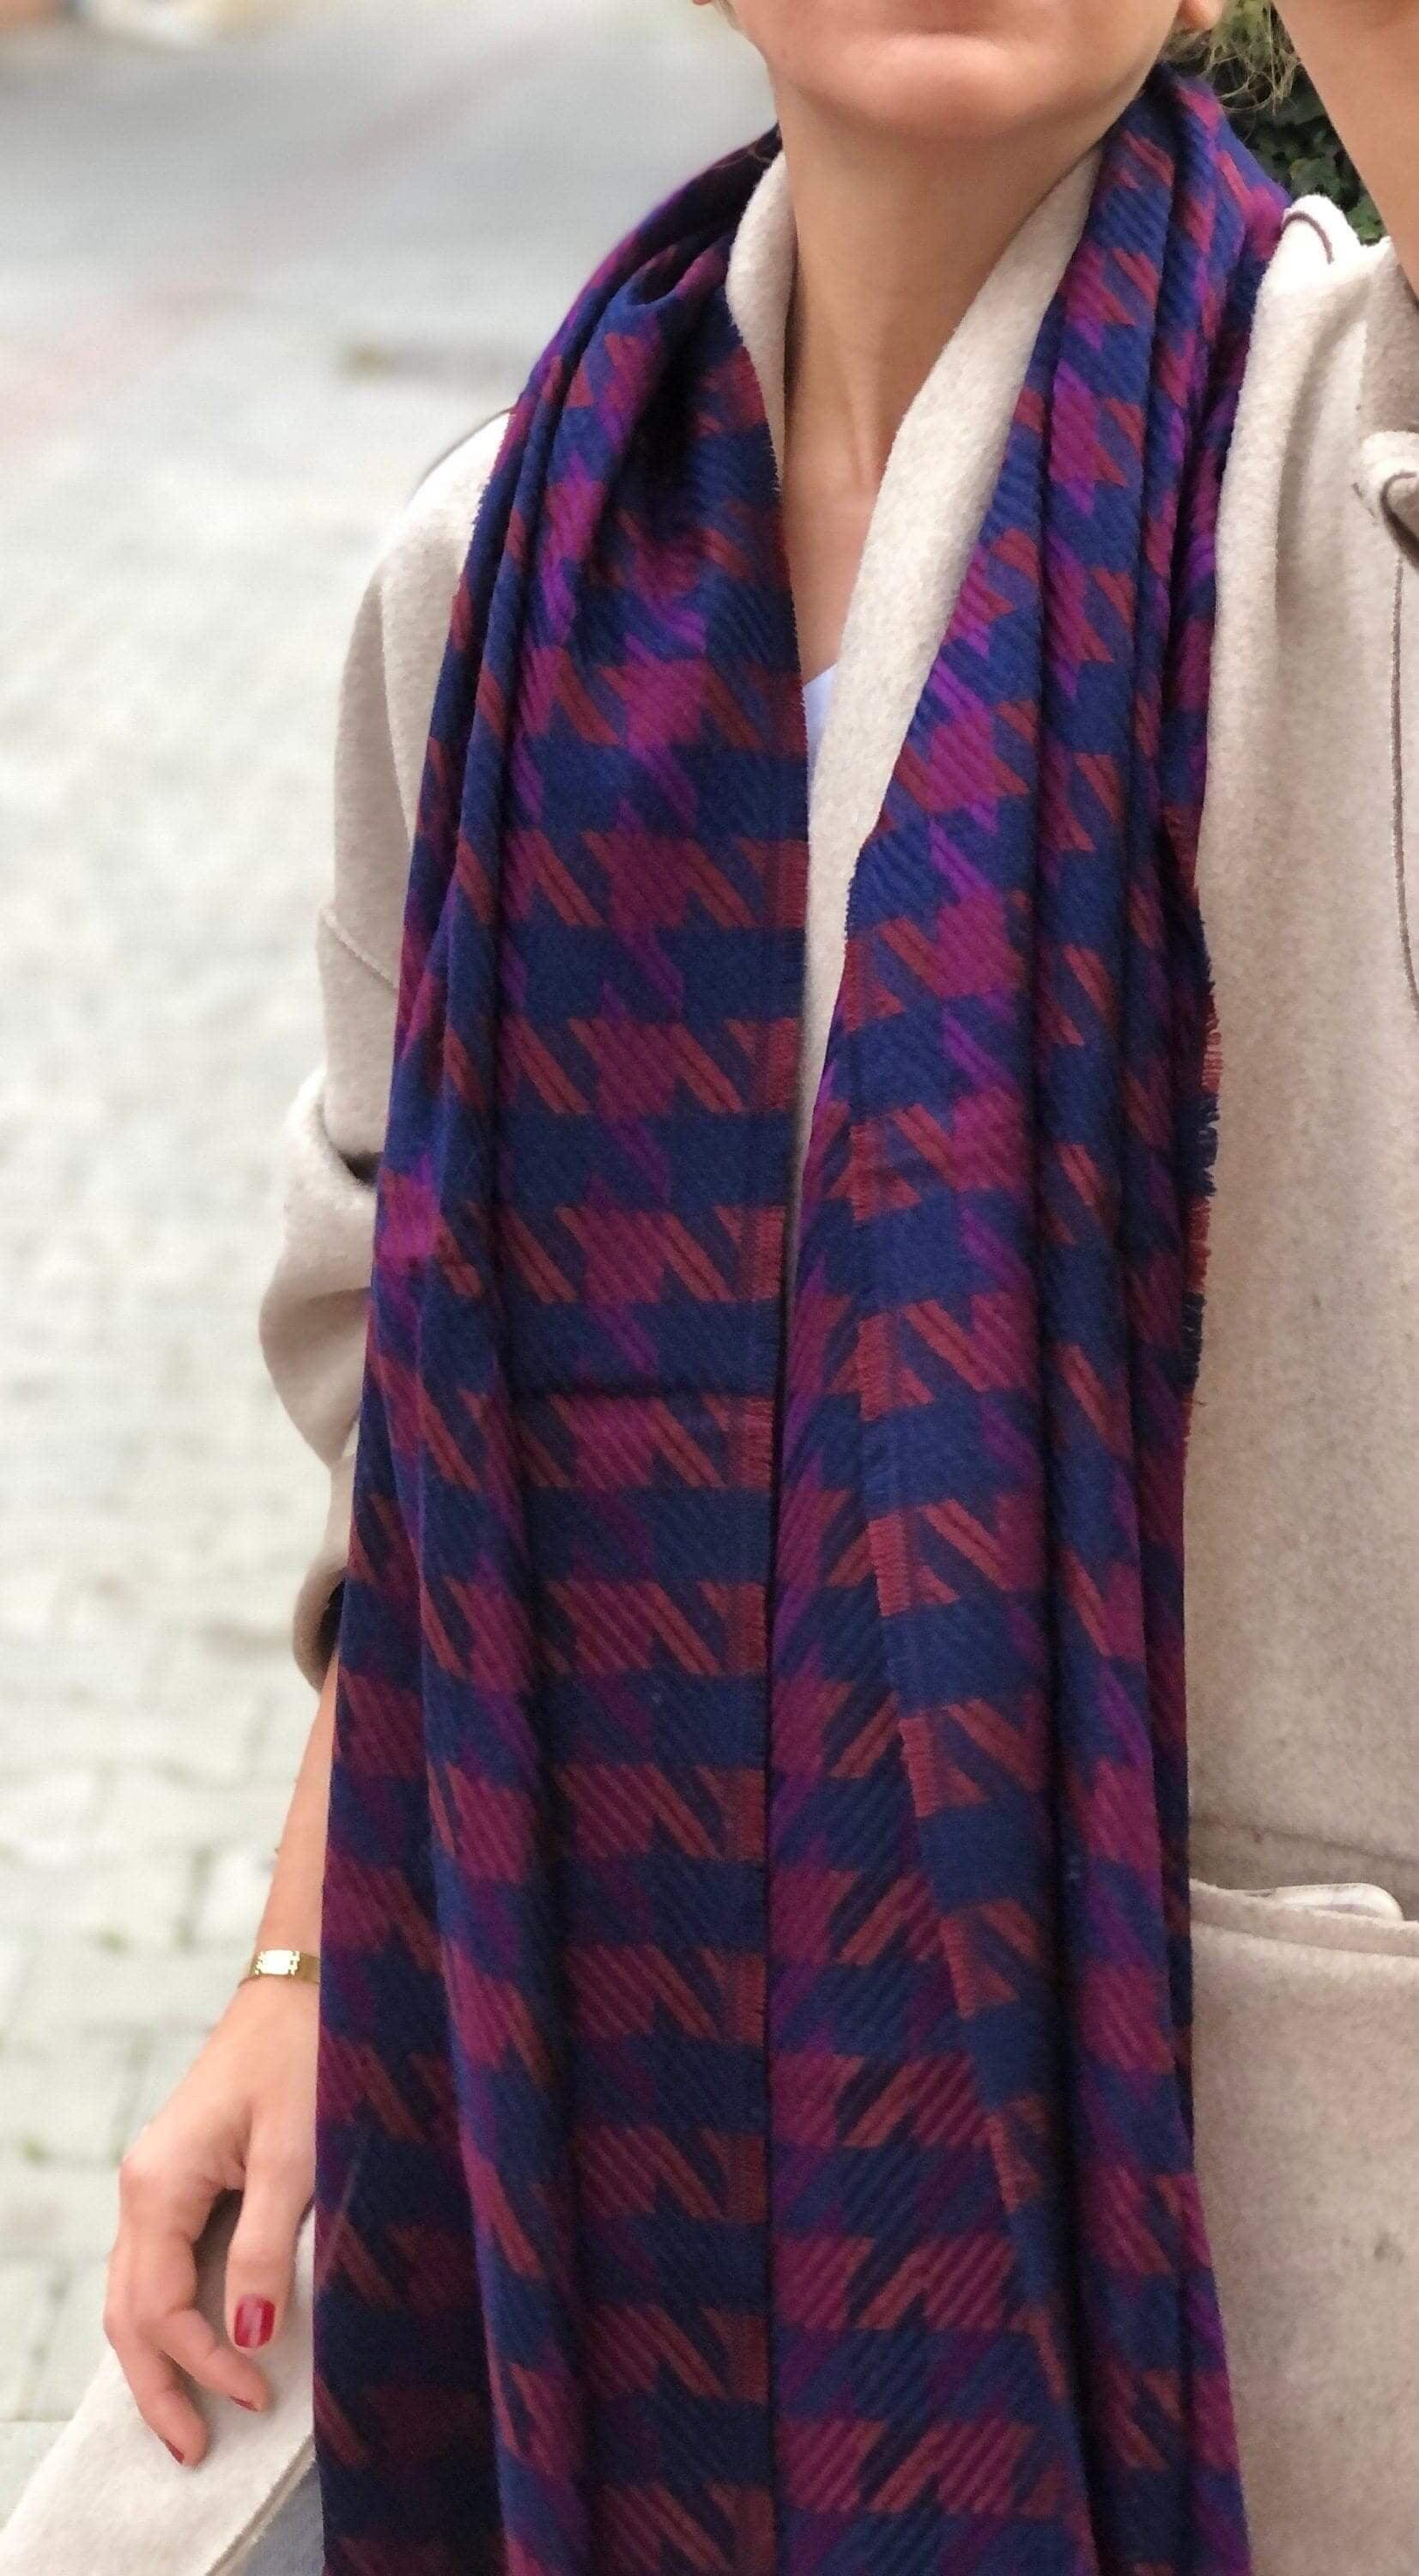 Unique Long Wool Acrylic Cotton Shawl with Goose Foot Pattern - Perfect for Spring, Winter, and Autumn - Warm Women's Travel Blanket Scarf available at Moyoni Design